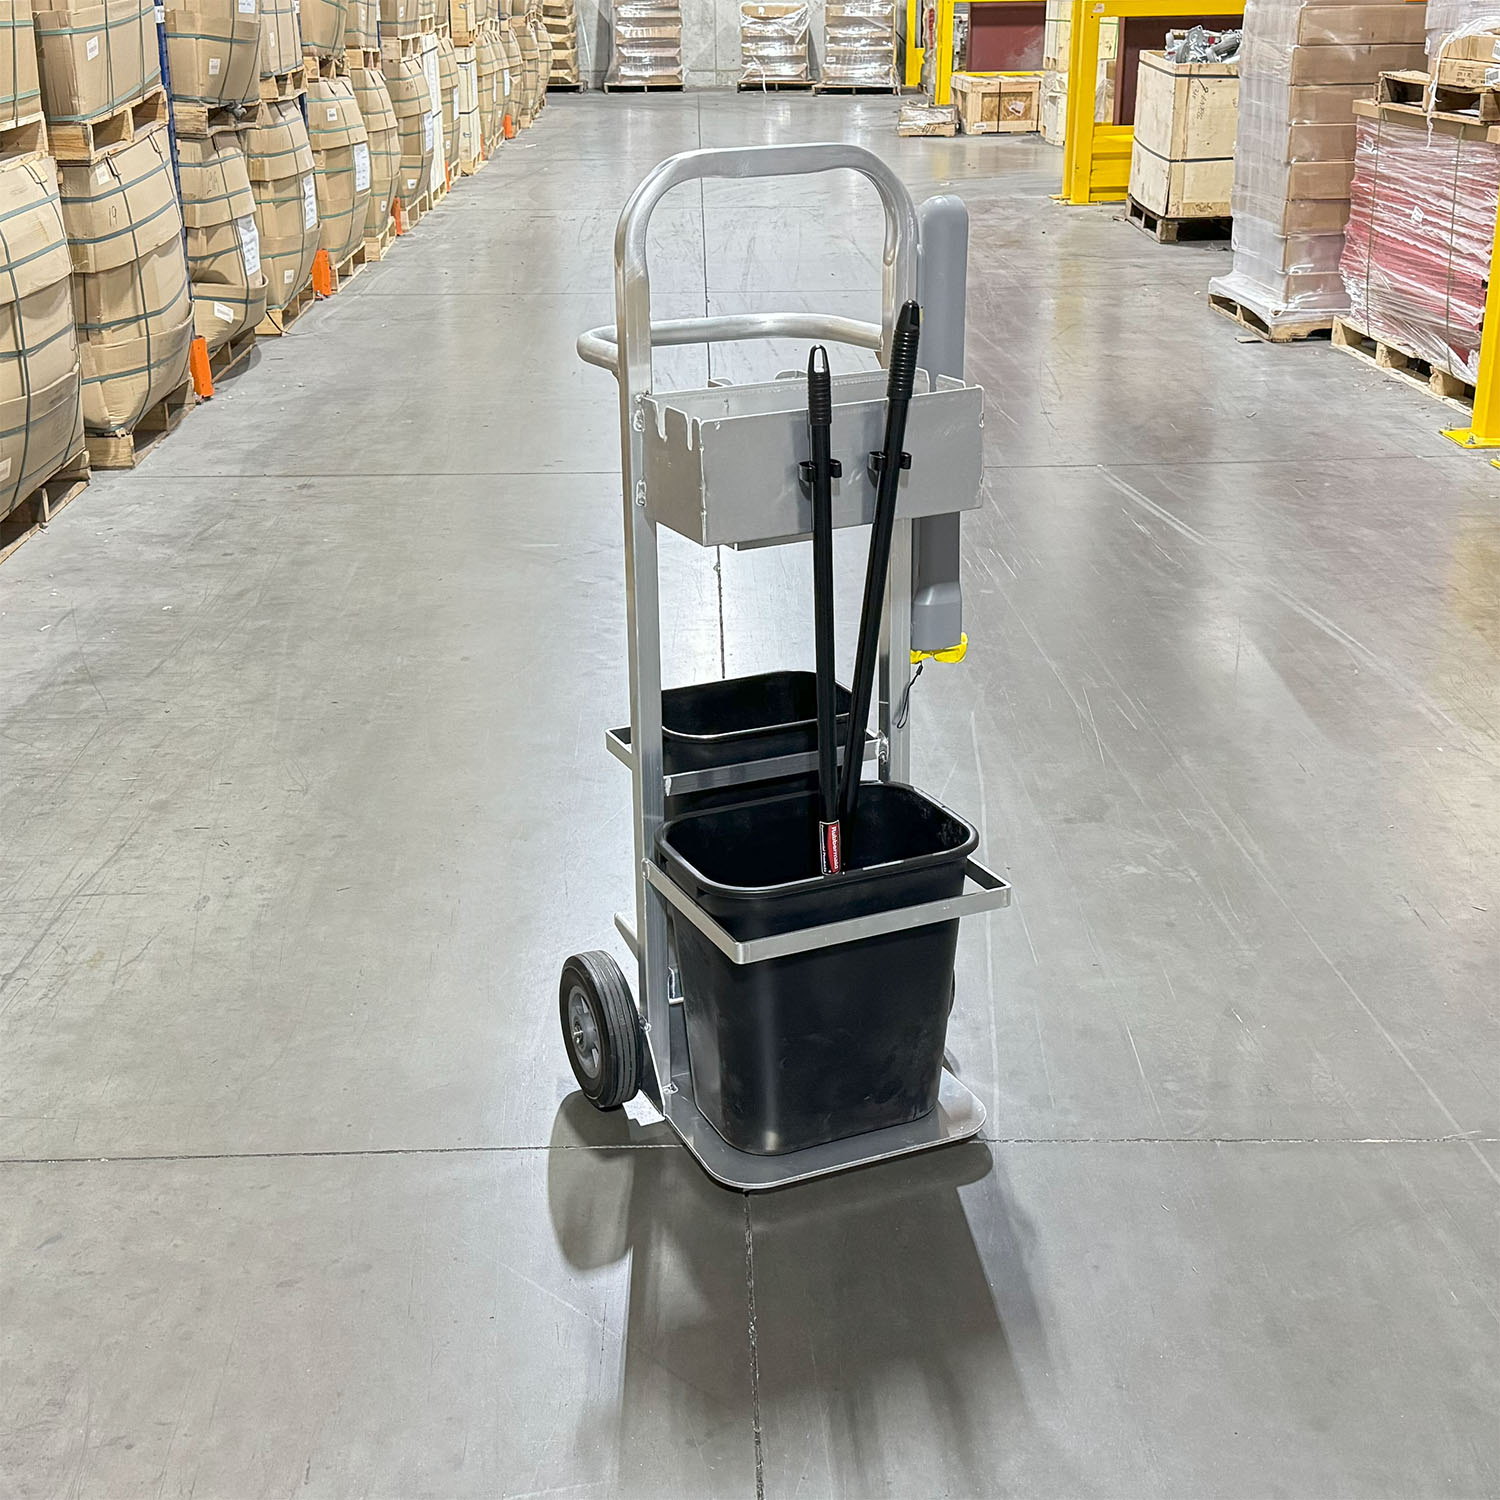 #CleaningEfficiency #ProfessionalCleaning #CommercialCleaning #IndustrialCleaning #OfficeCleaning #HotelHousekeeping #FacilityMaintenance #TrashCansIncluded #SmoothMovement #EasyToAssemble #EasyToClean #StorageSolutions #VersatileCleaningCart #MultipurposeCart #ErgonomicDesign #HeavyDutyCart #DurableCleaningCart #CleaningCart #JanitorialCart #CleaningSupplies #CleaningTools #JanitorialSupplies#WetFloorSign #SafetyFirst #FloorSafety #JanitorialEquipment #CleaningMadeEasy #OrganizedCleaning